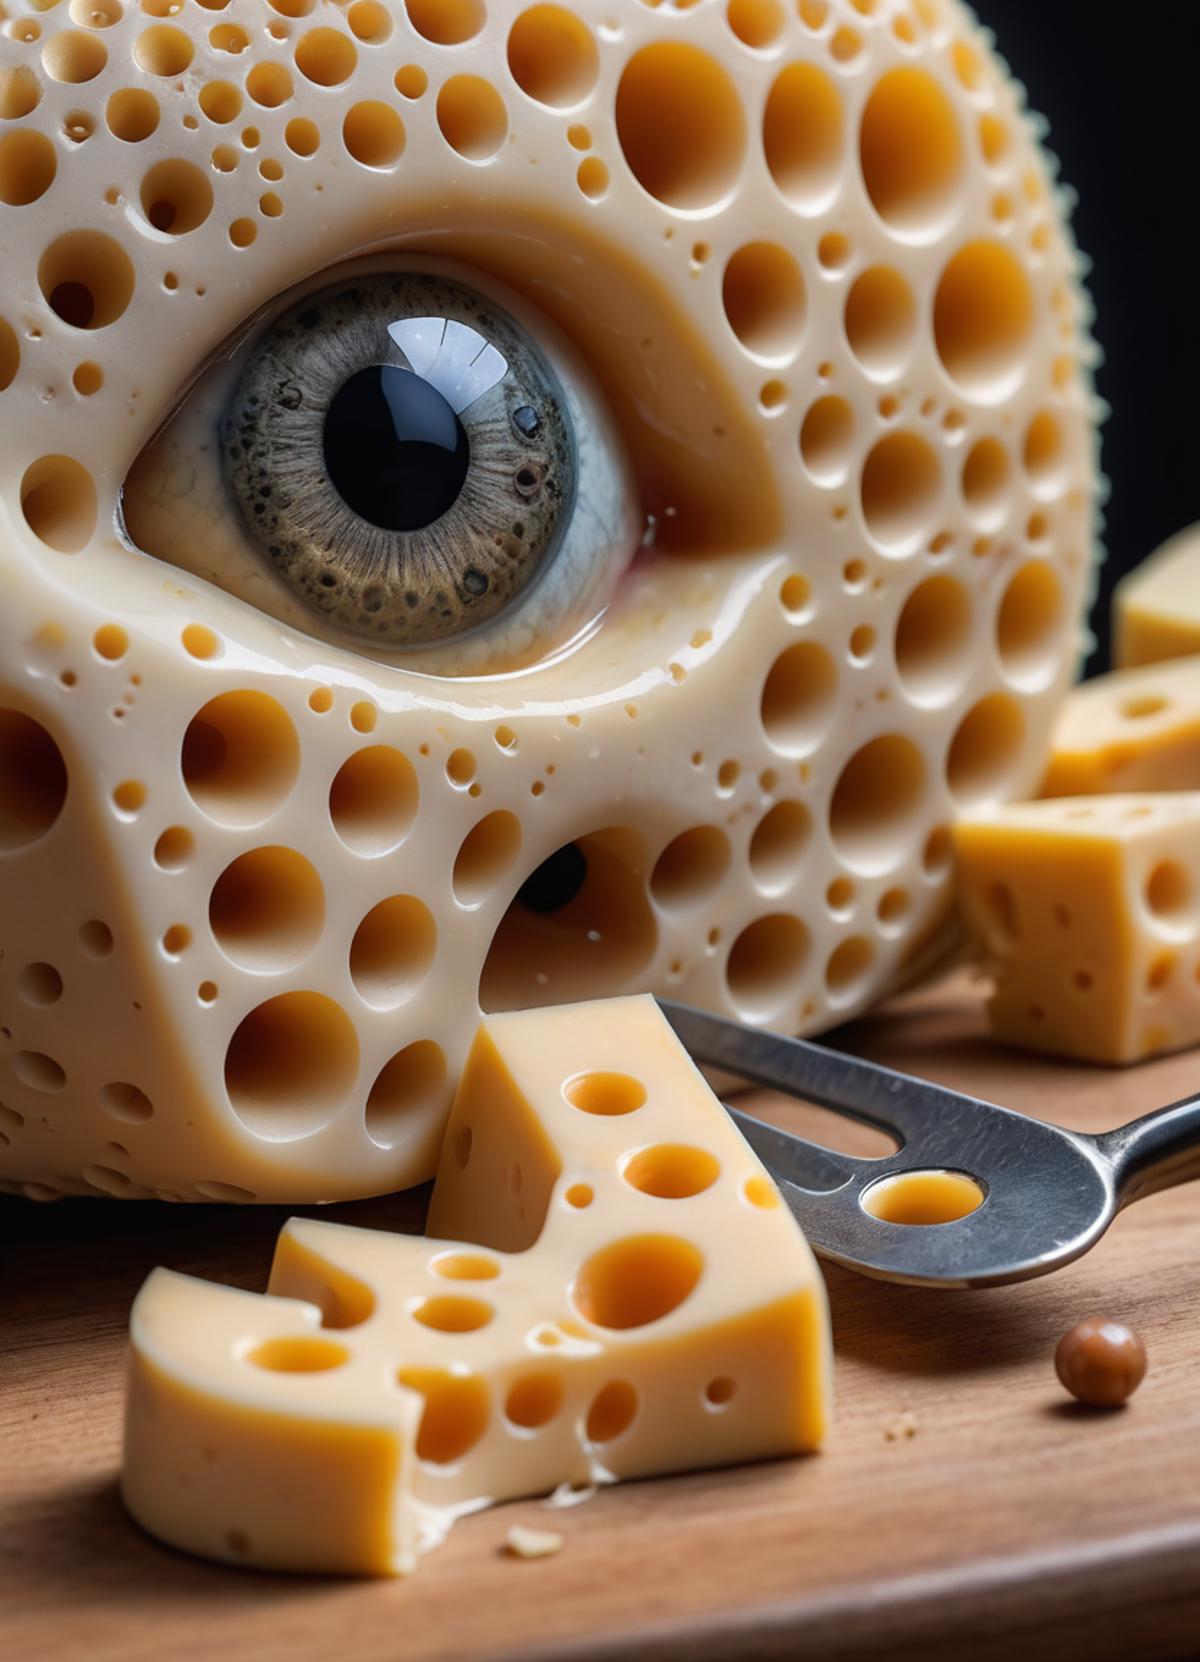 Cheese sculpture with a toothpick sticking out of the eye and a knife in its mouth.